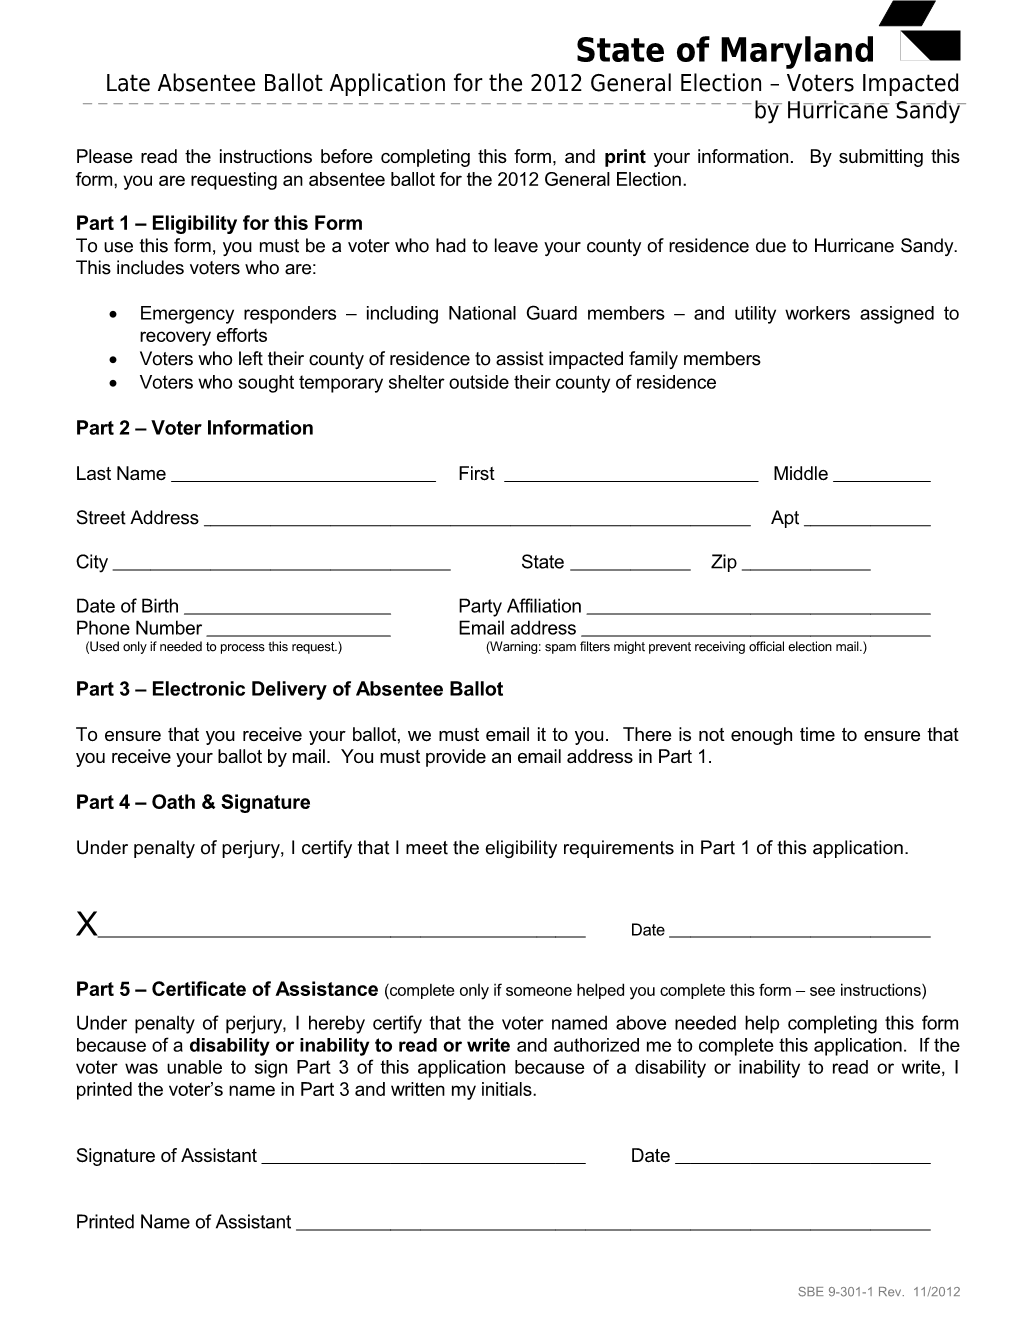 Late Absentee Ballot Application for the 2012 General Election Voters Impacted by Hurricane